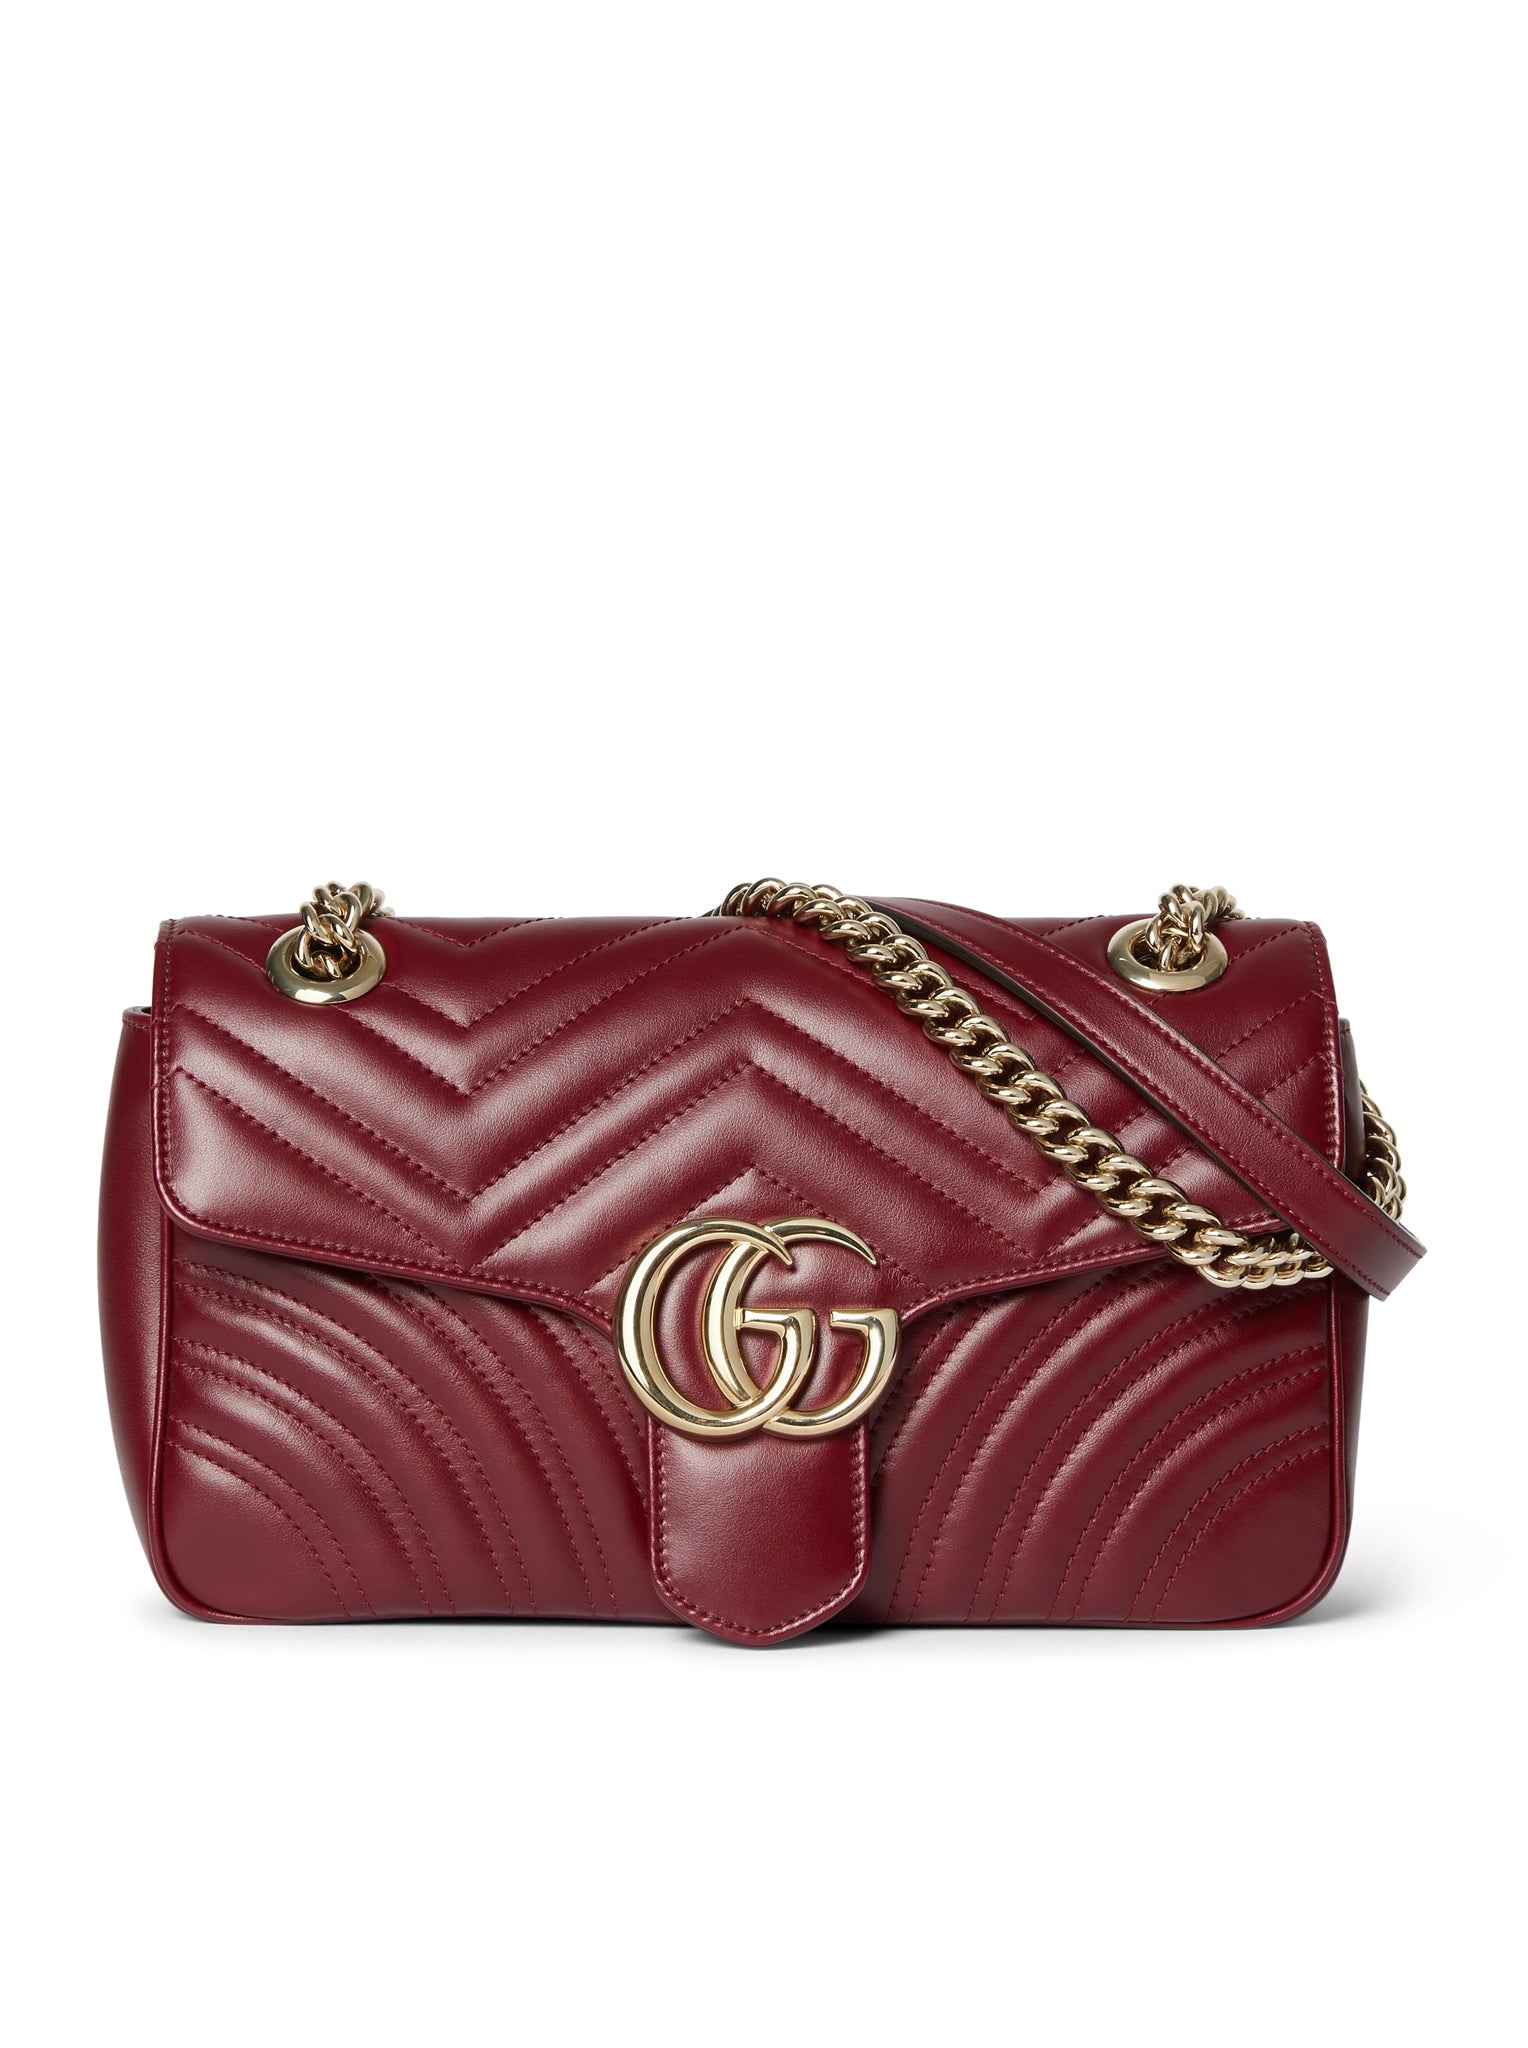 GG MARMONT SMALL SHOULDER BAG - 1